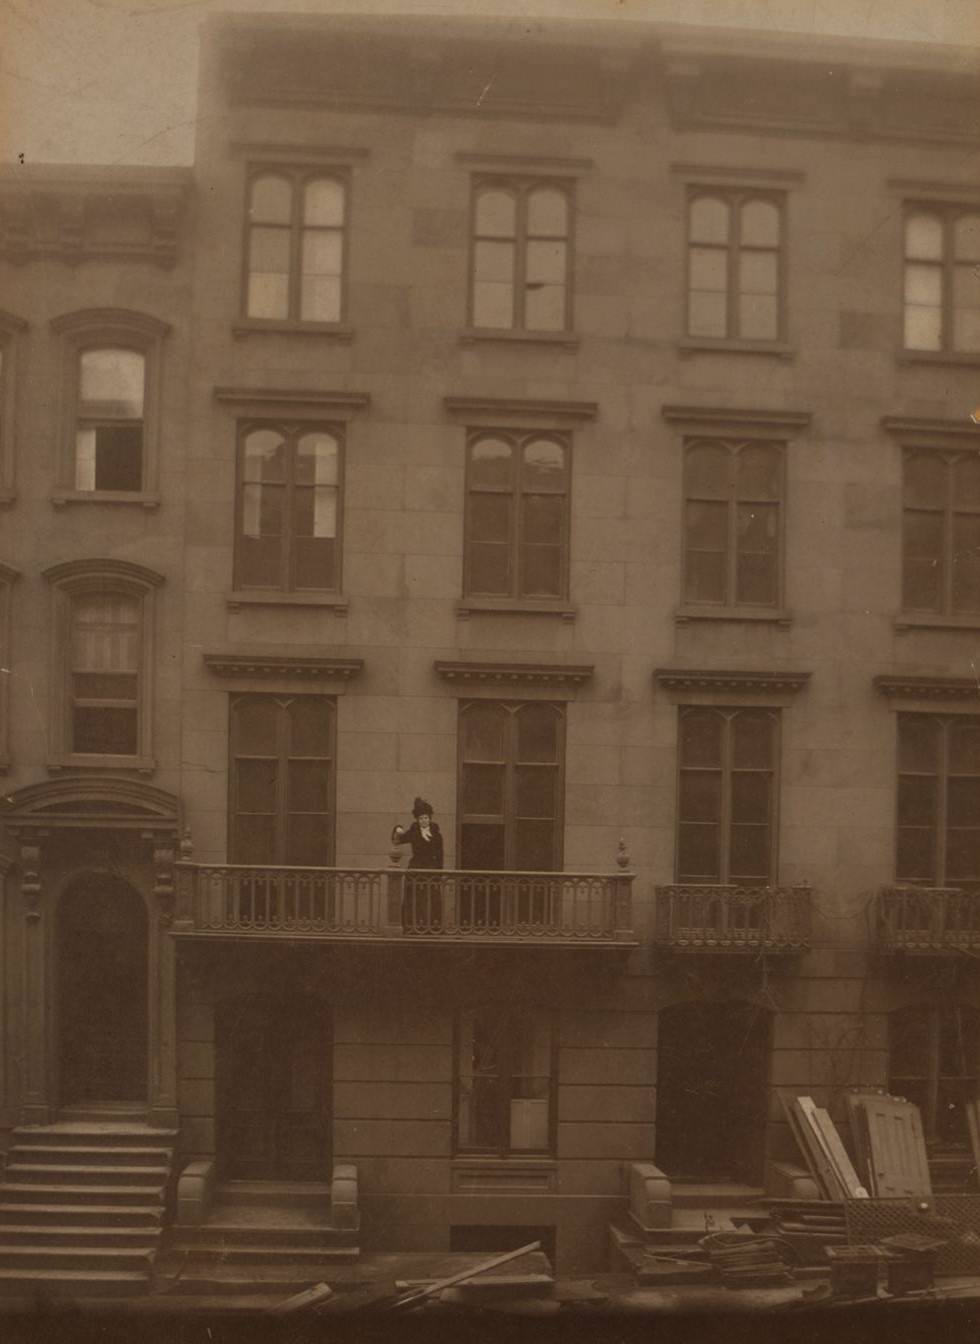 33Rd Street (West) And 8Th Avenue, Manhattan, 1860S.